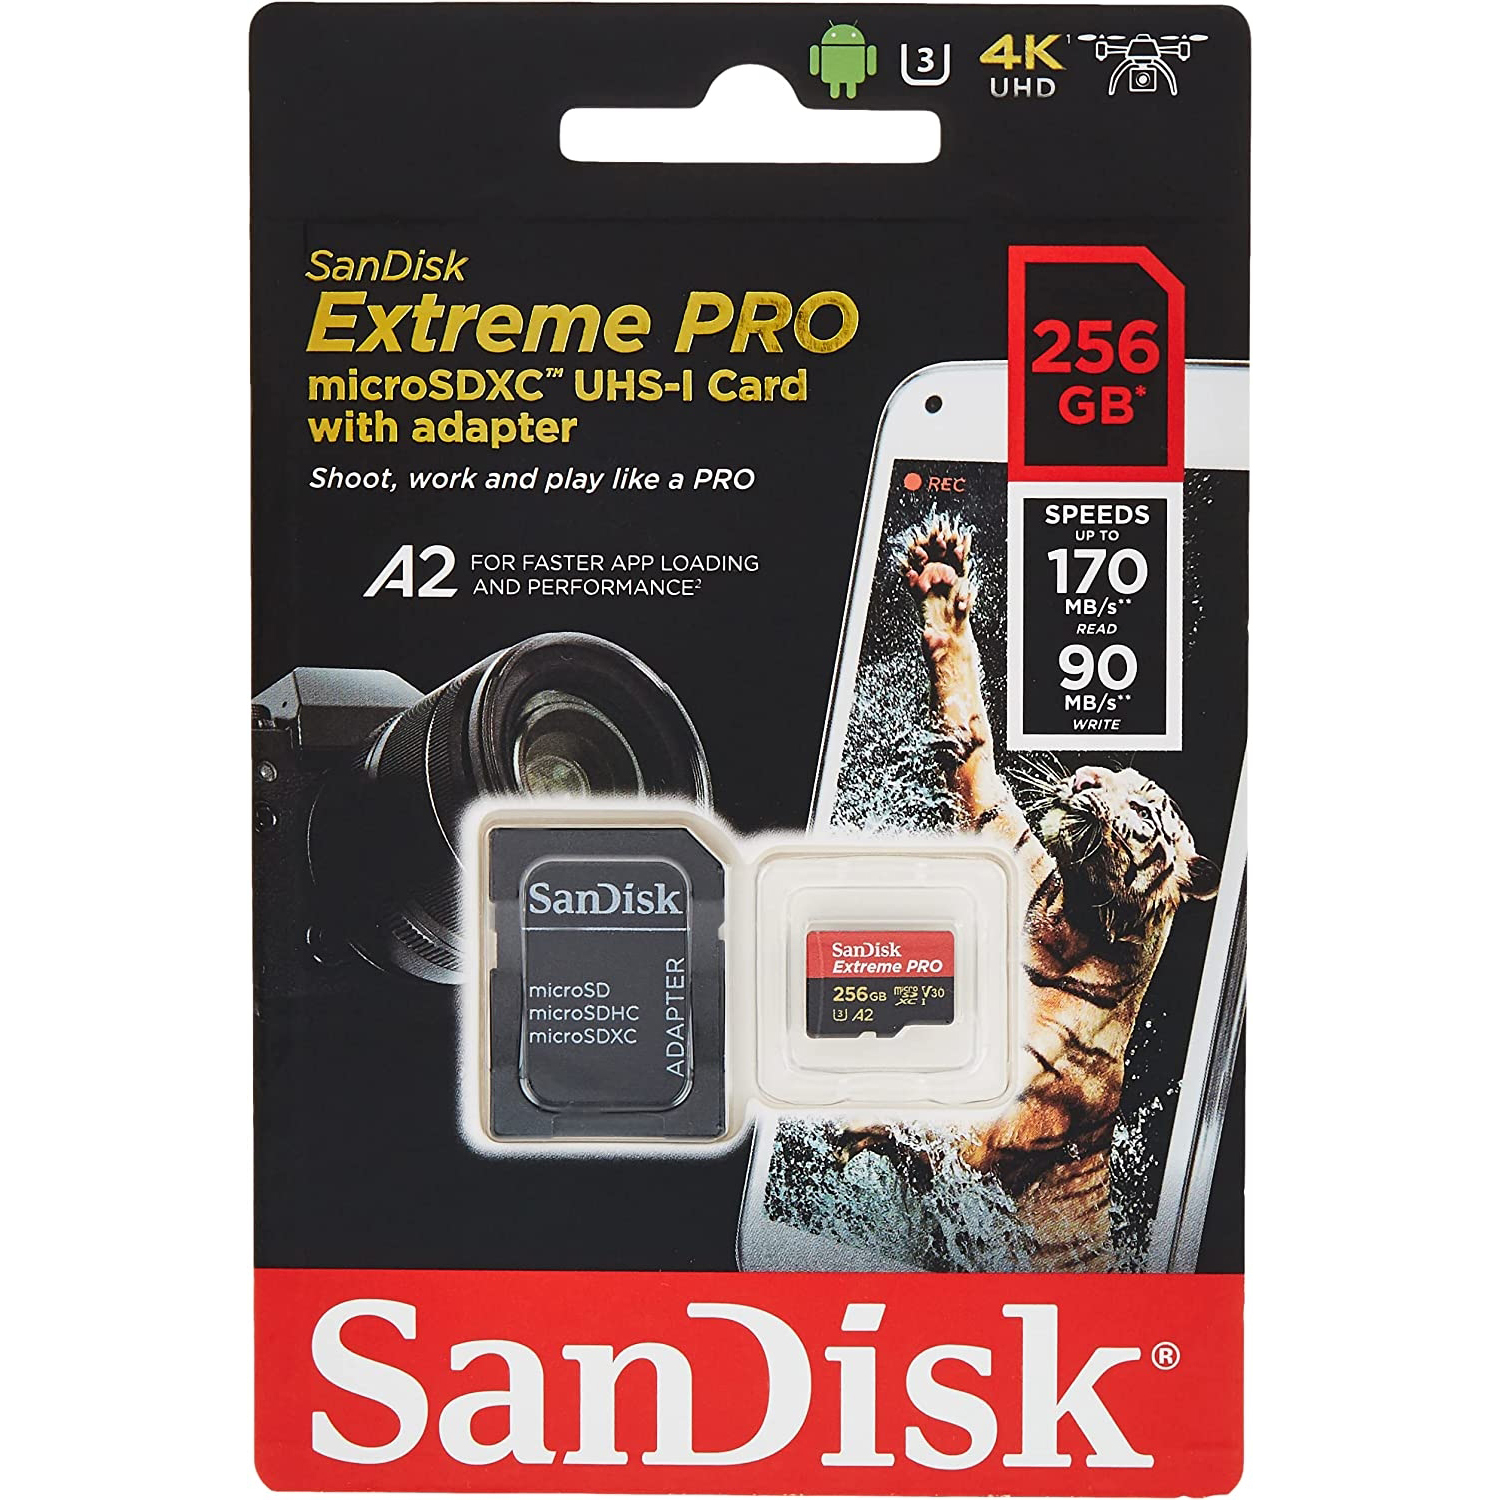 Original Sandisk Extreme Pro 256Gb Microsdxc Uhs-I Class 10 Memory Card And Adapter (SDSQXCD-256G-GN6MA)